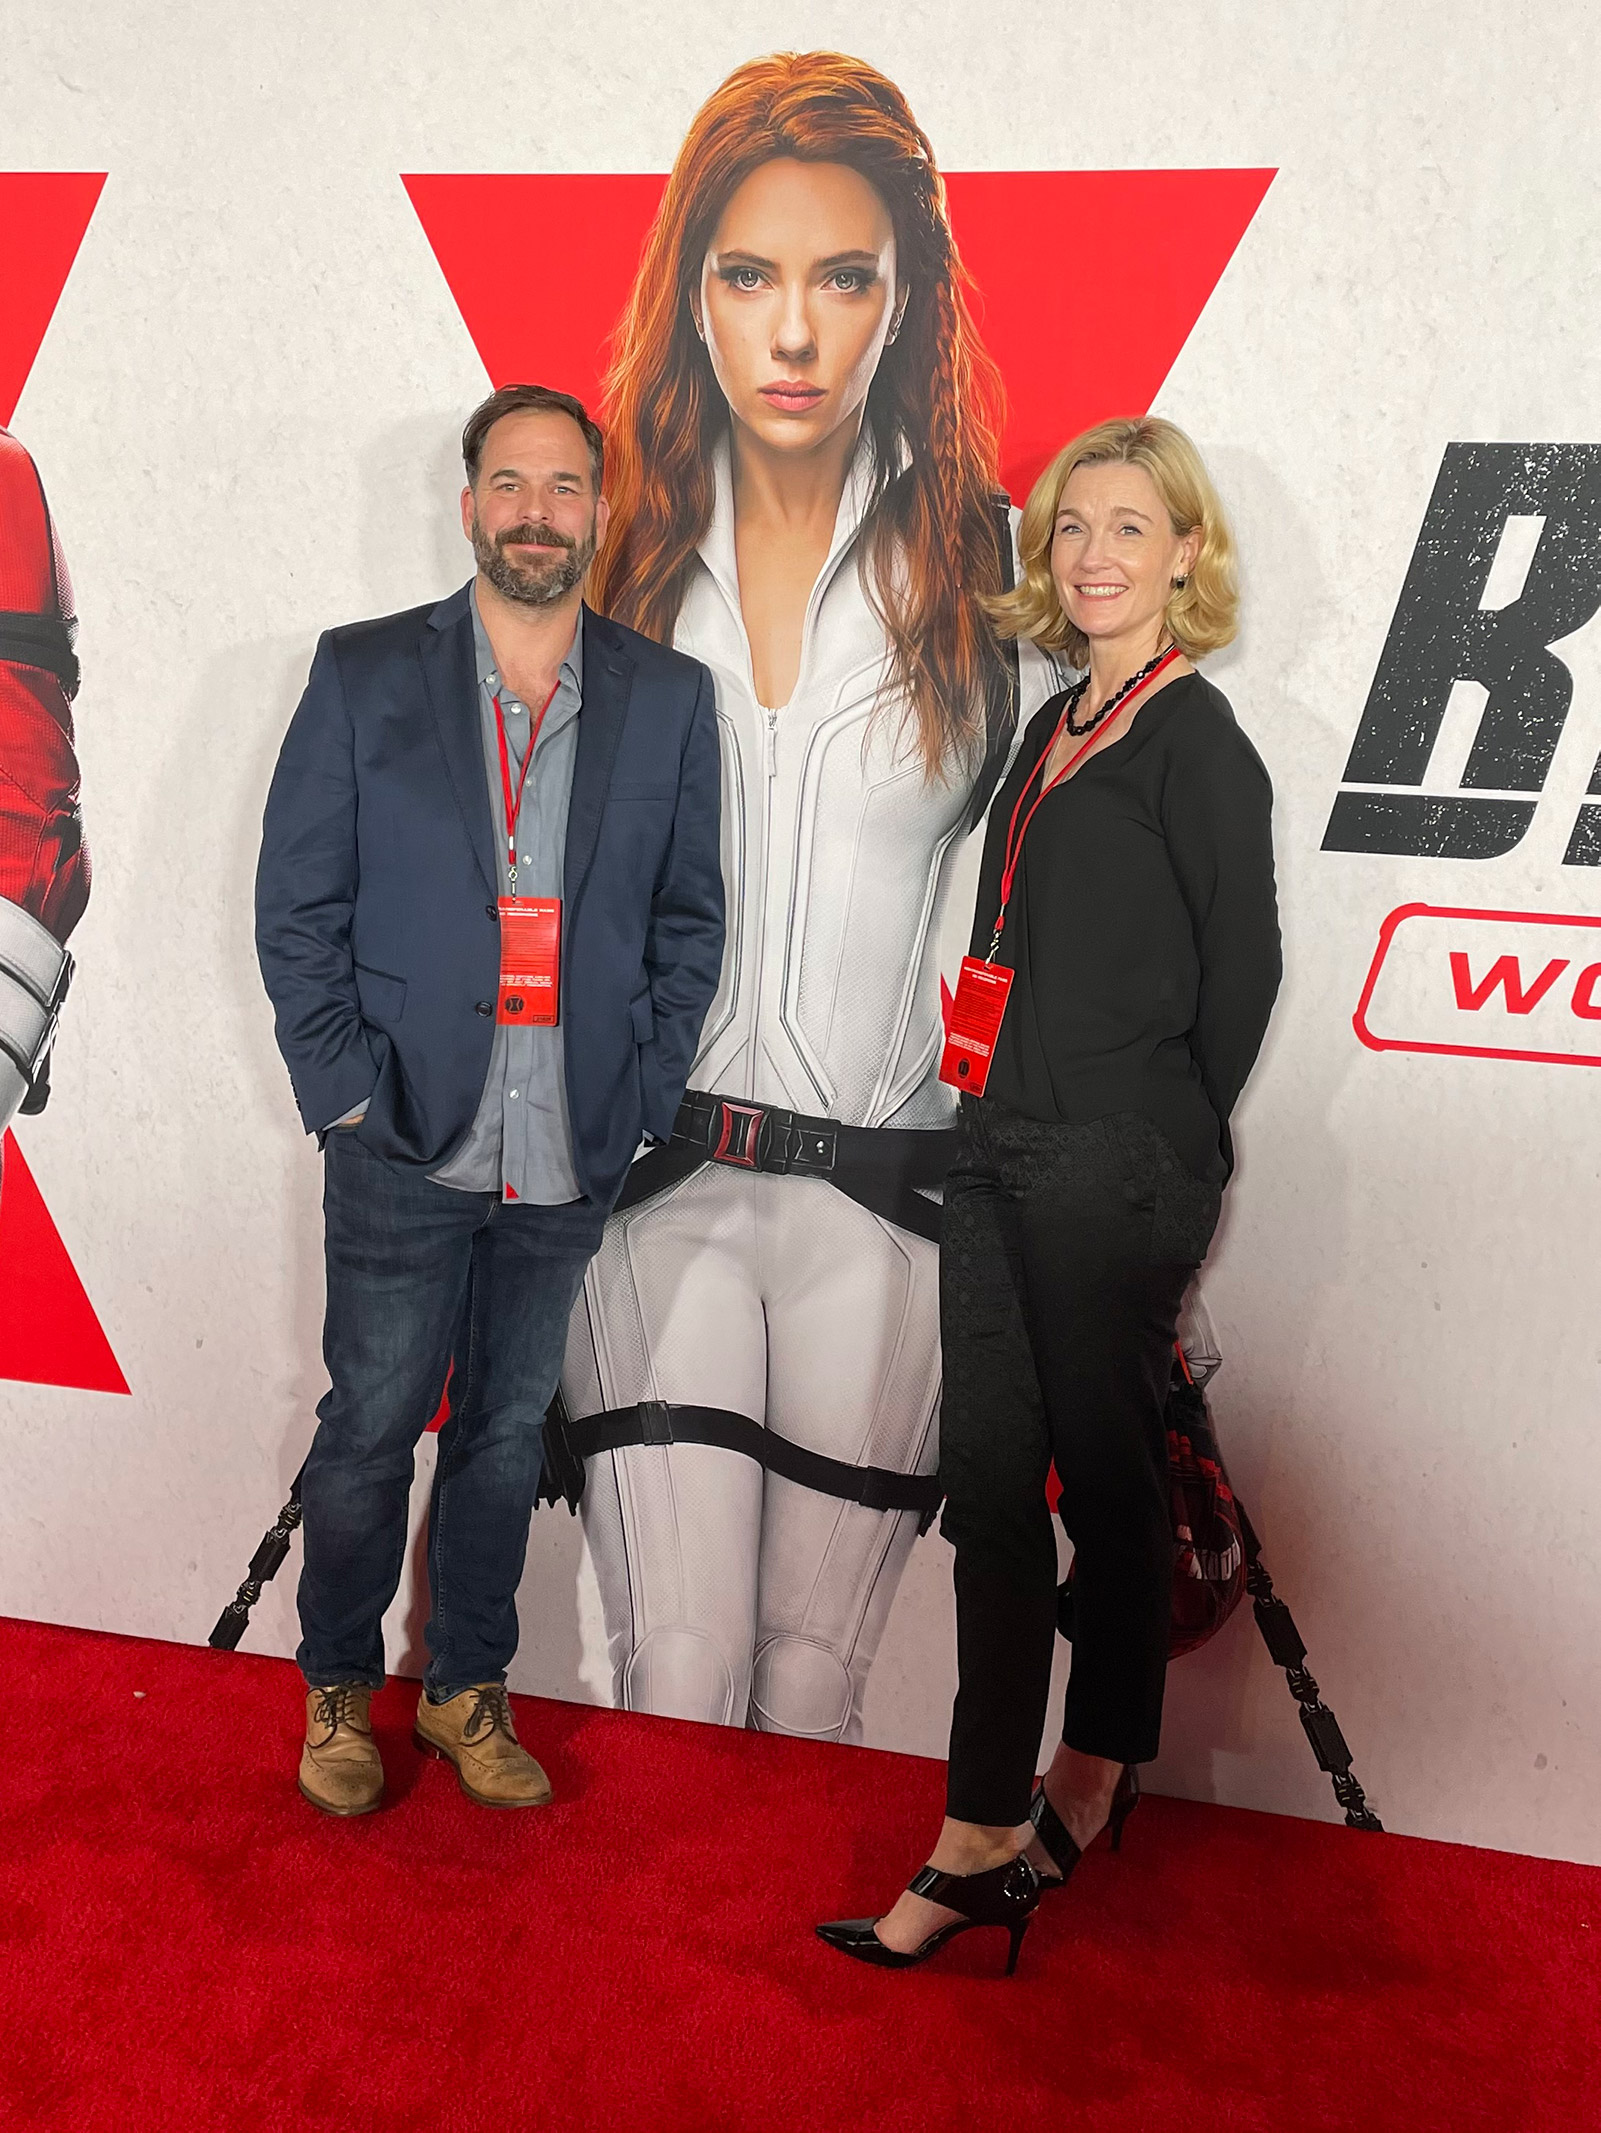 Editors Leigh Folsom Boyd, ACE, and Matthew Schmidt at the premiere of "Black Widow"